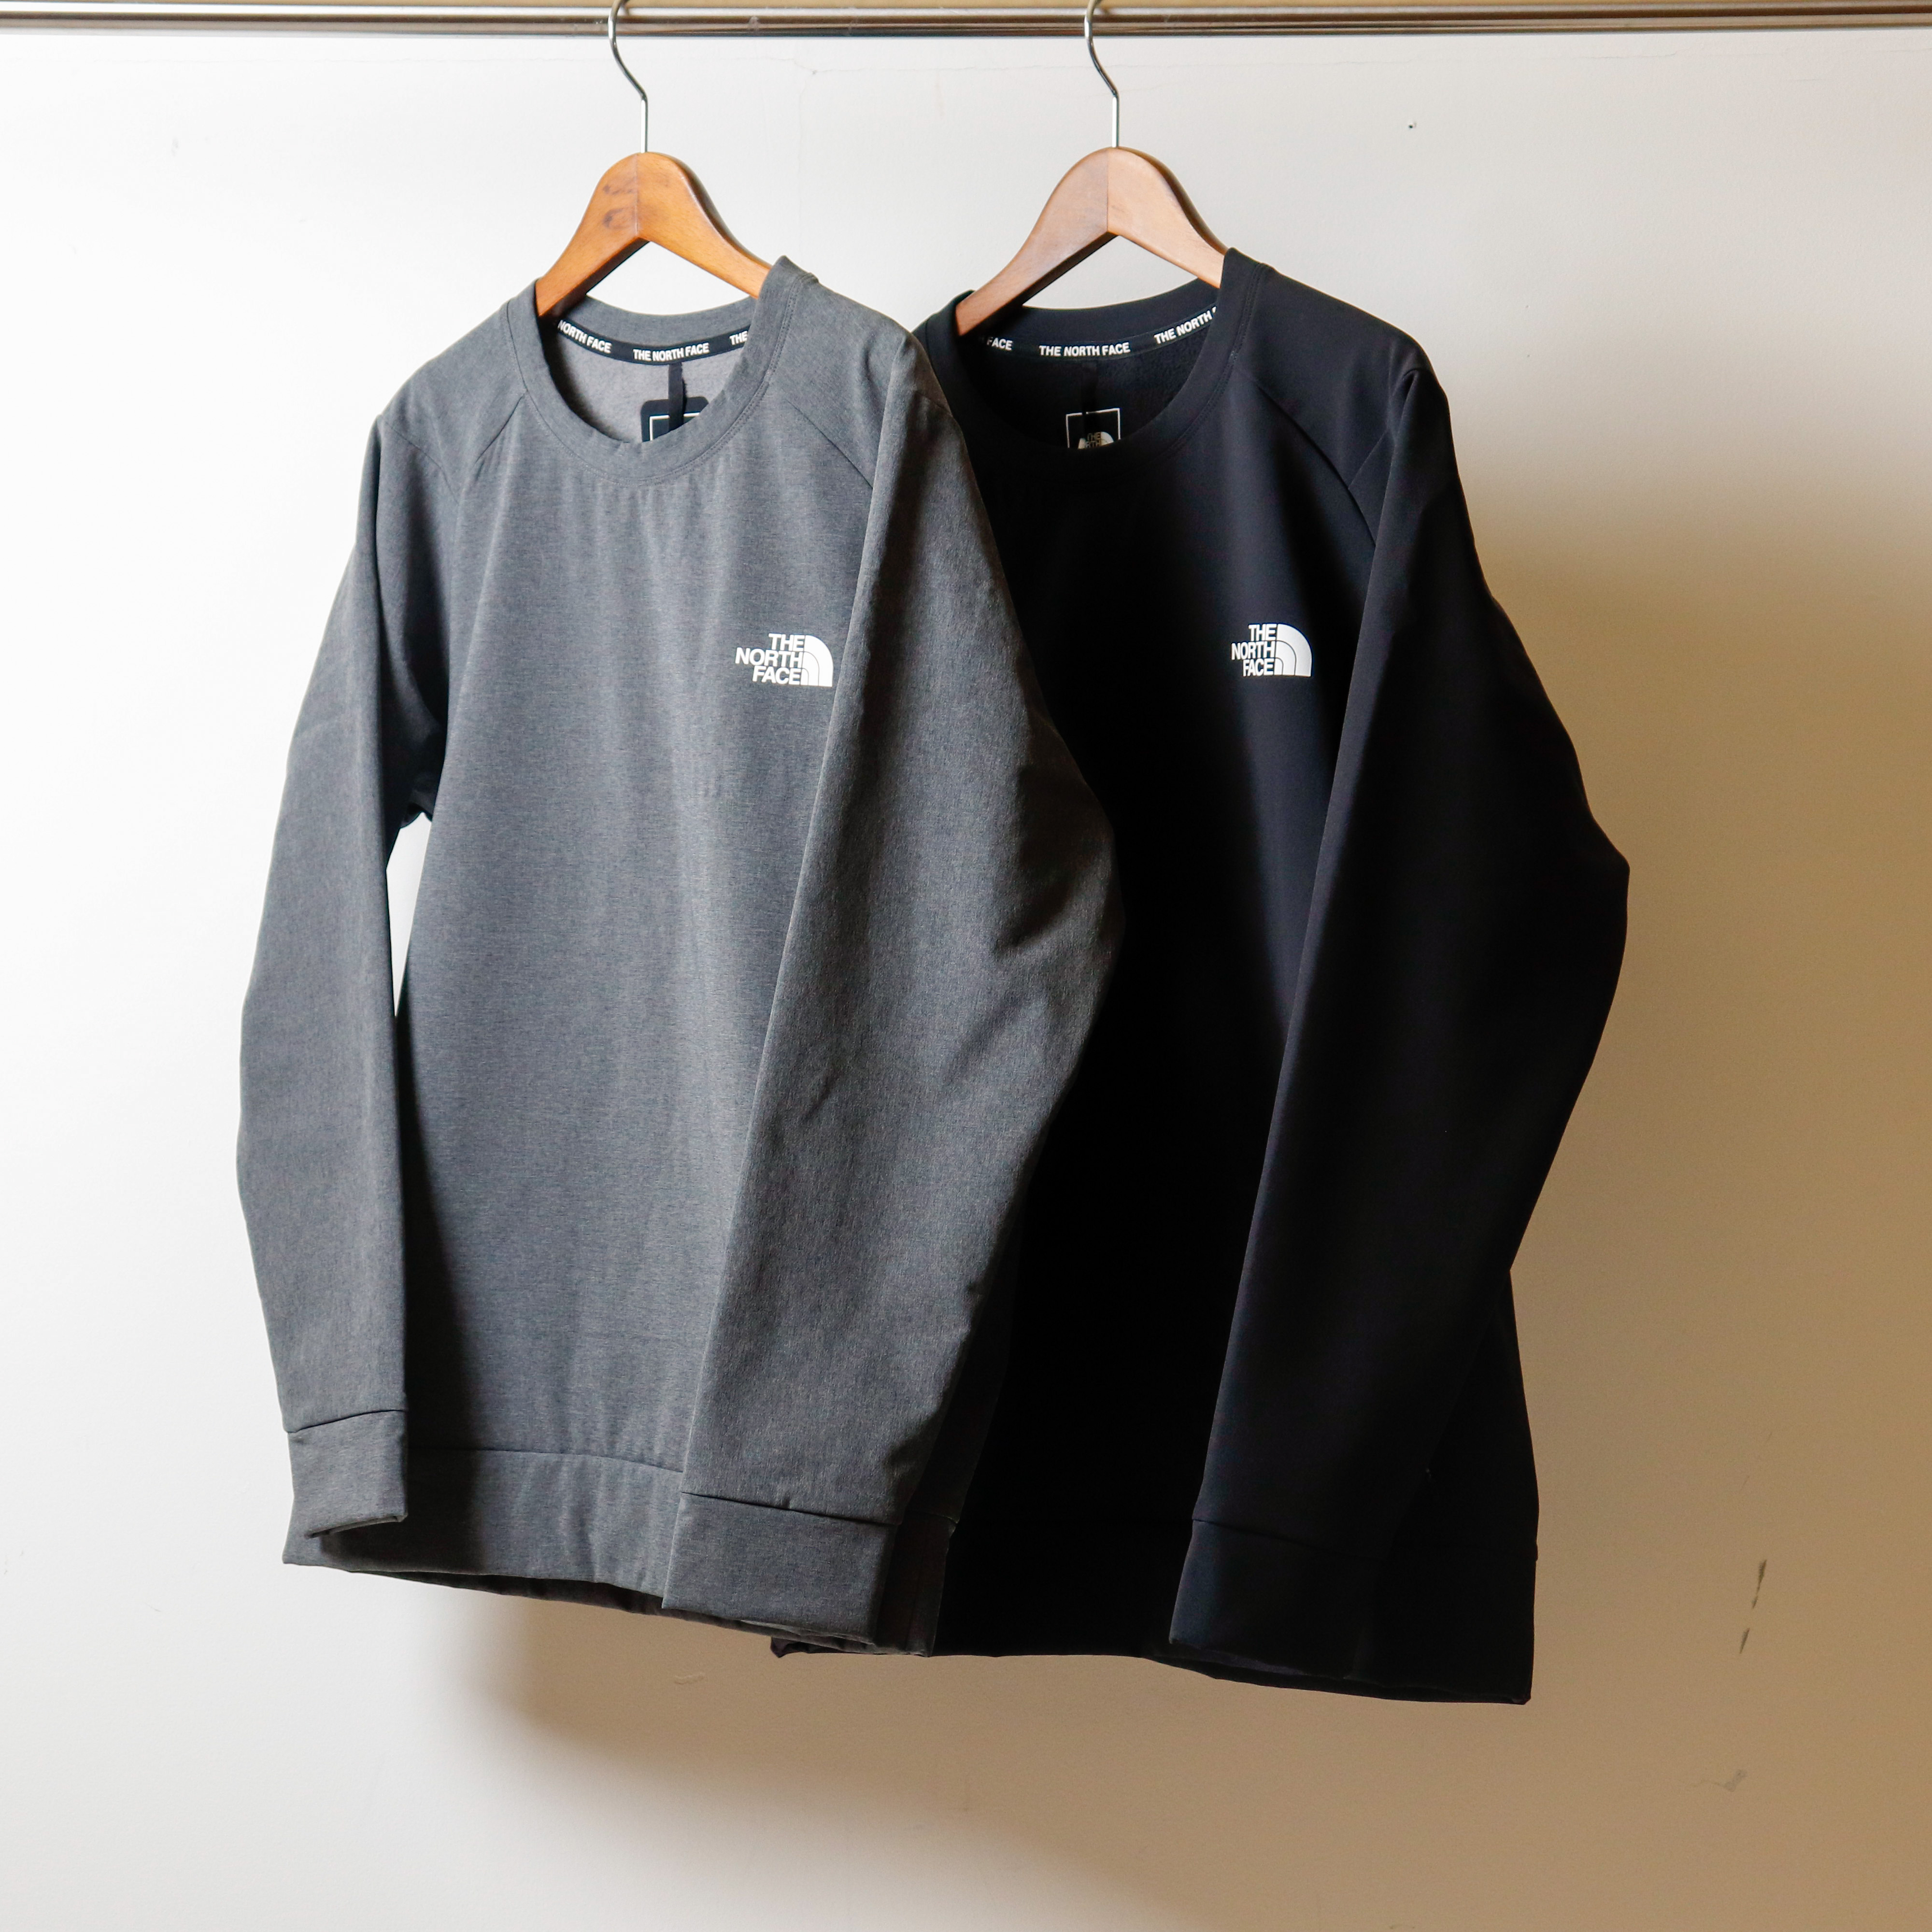 Men's】「楽しい」季節を「楽」に～THE NORTH FACE NEW ITEM 